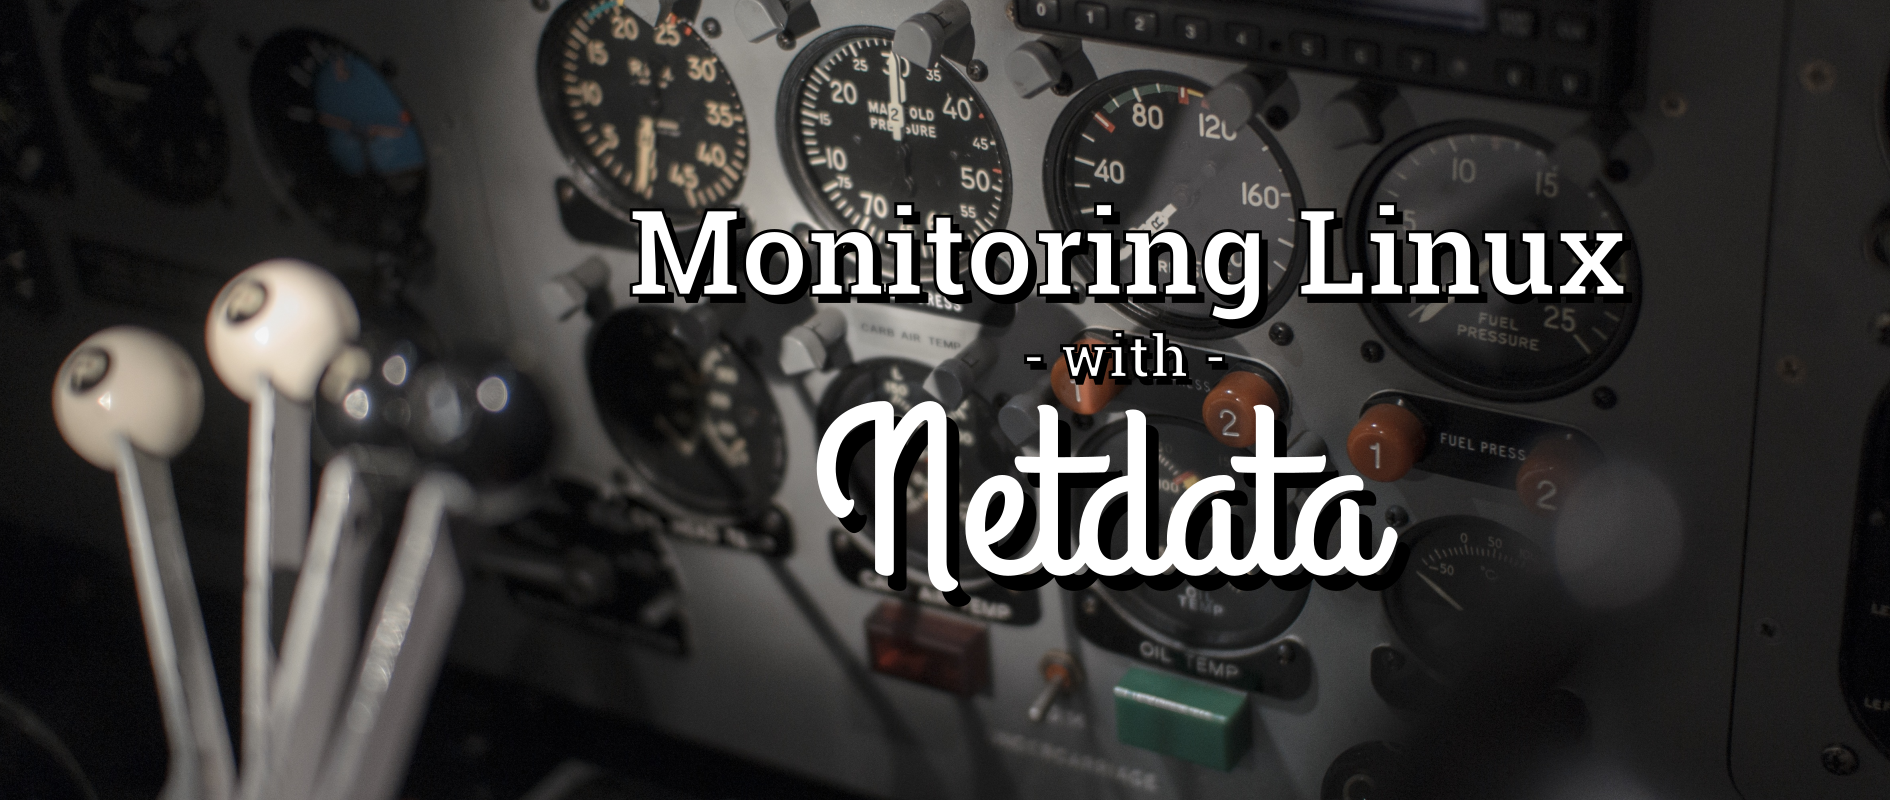 Monitoring Linux with Netdata